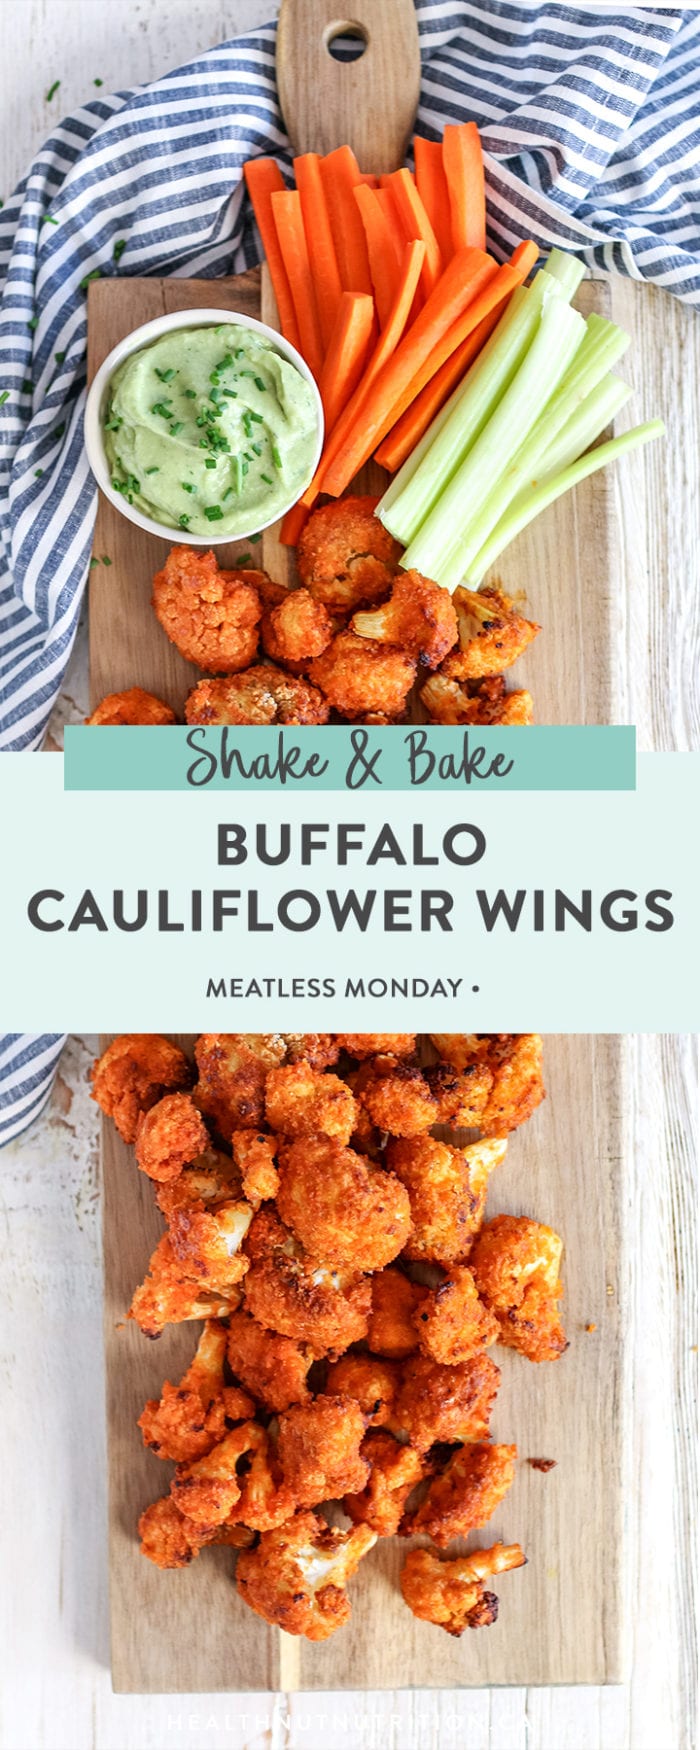 These healthy baked cauliflower wings are saucy and crispy on the outside and tender on the inside. They are full of flavour and perfect enjoyed as a side, appetizer or game night!